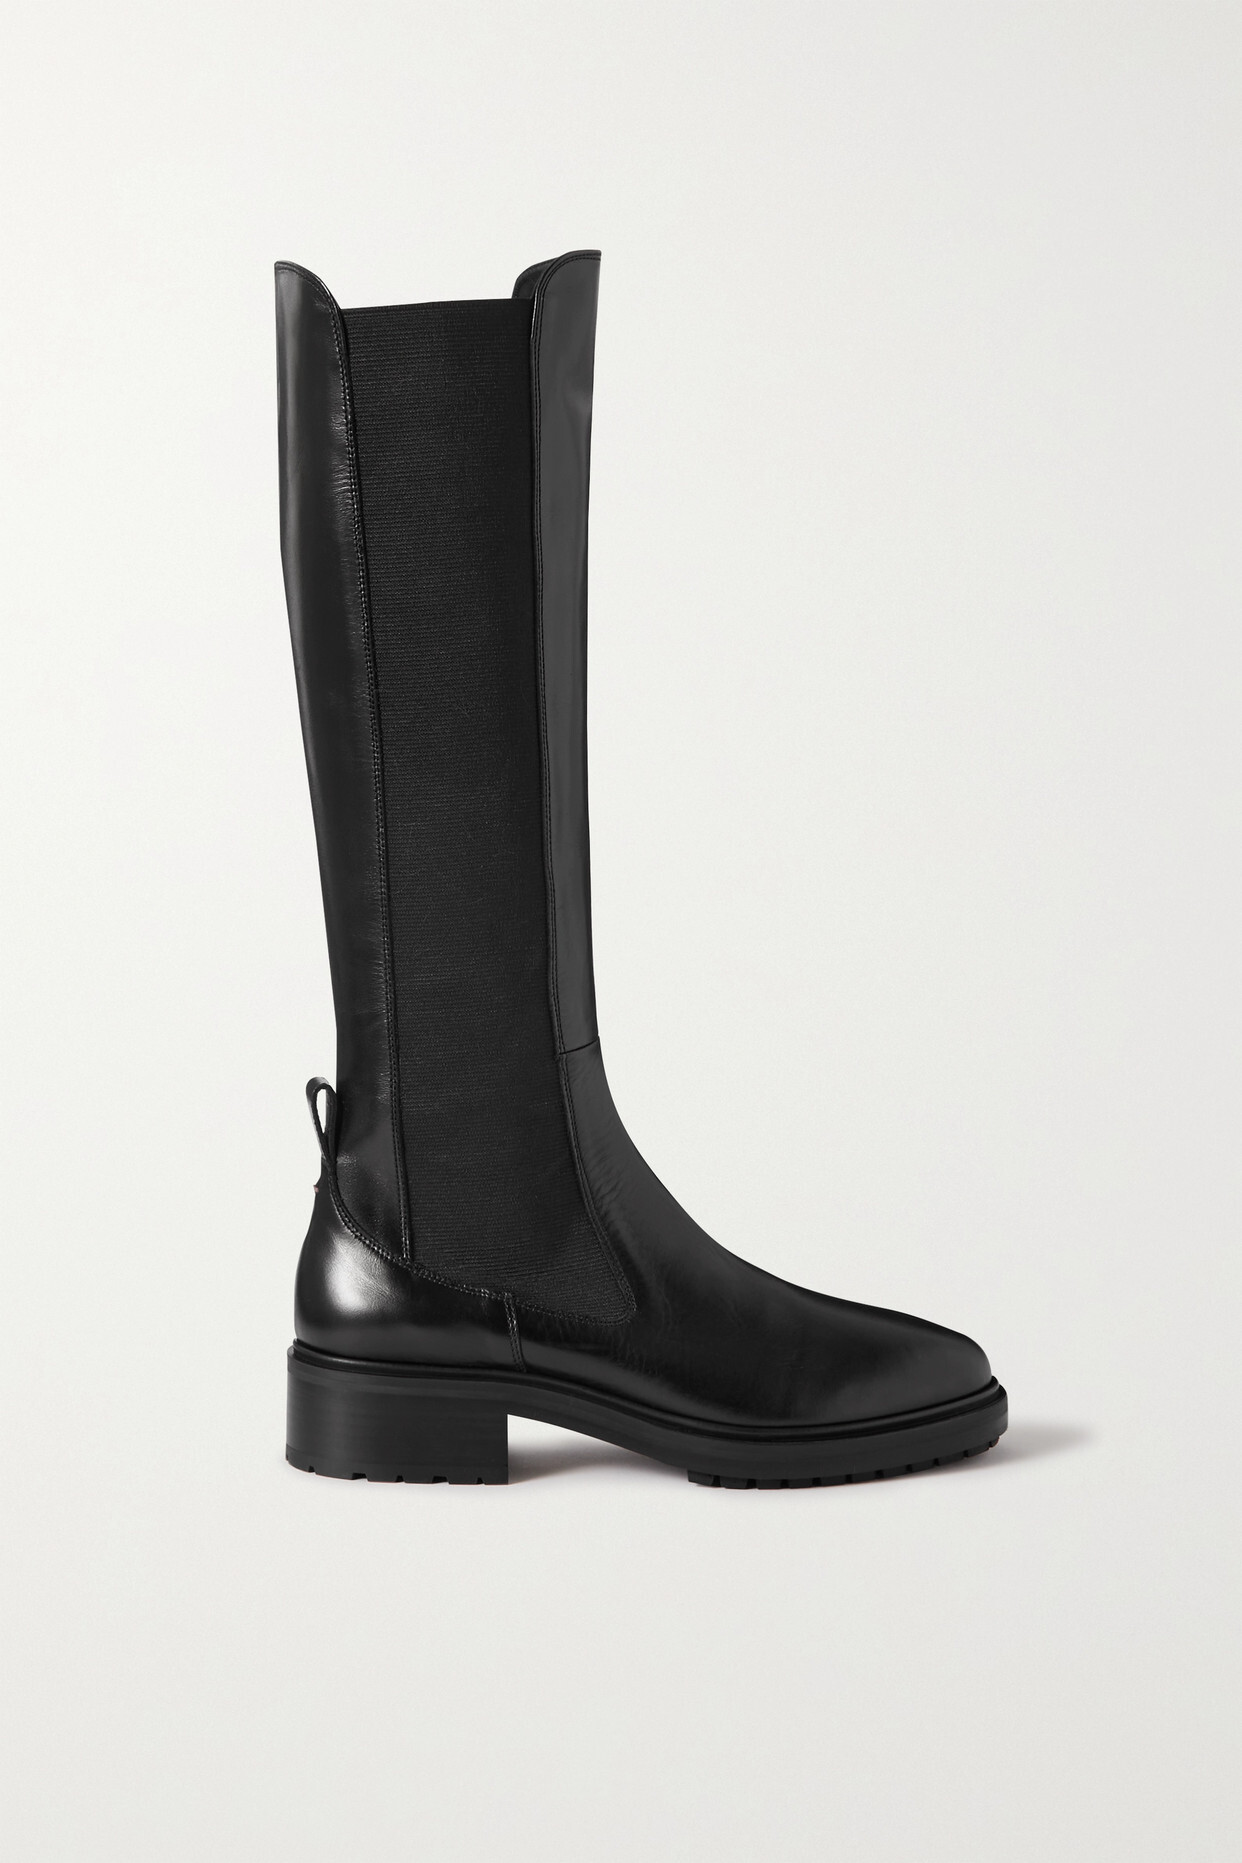 aeyde - Blanca Leather Knee Boots - Black